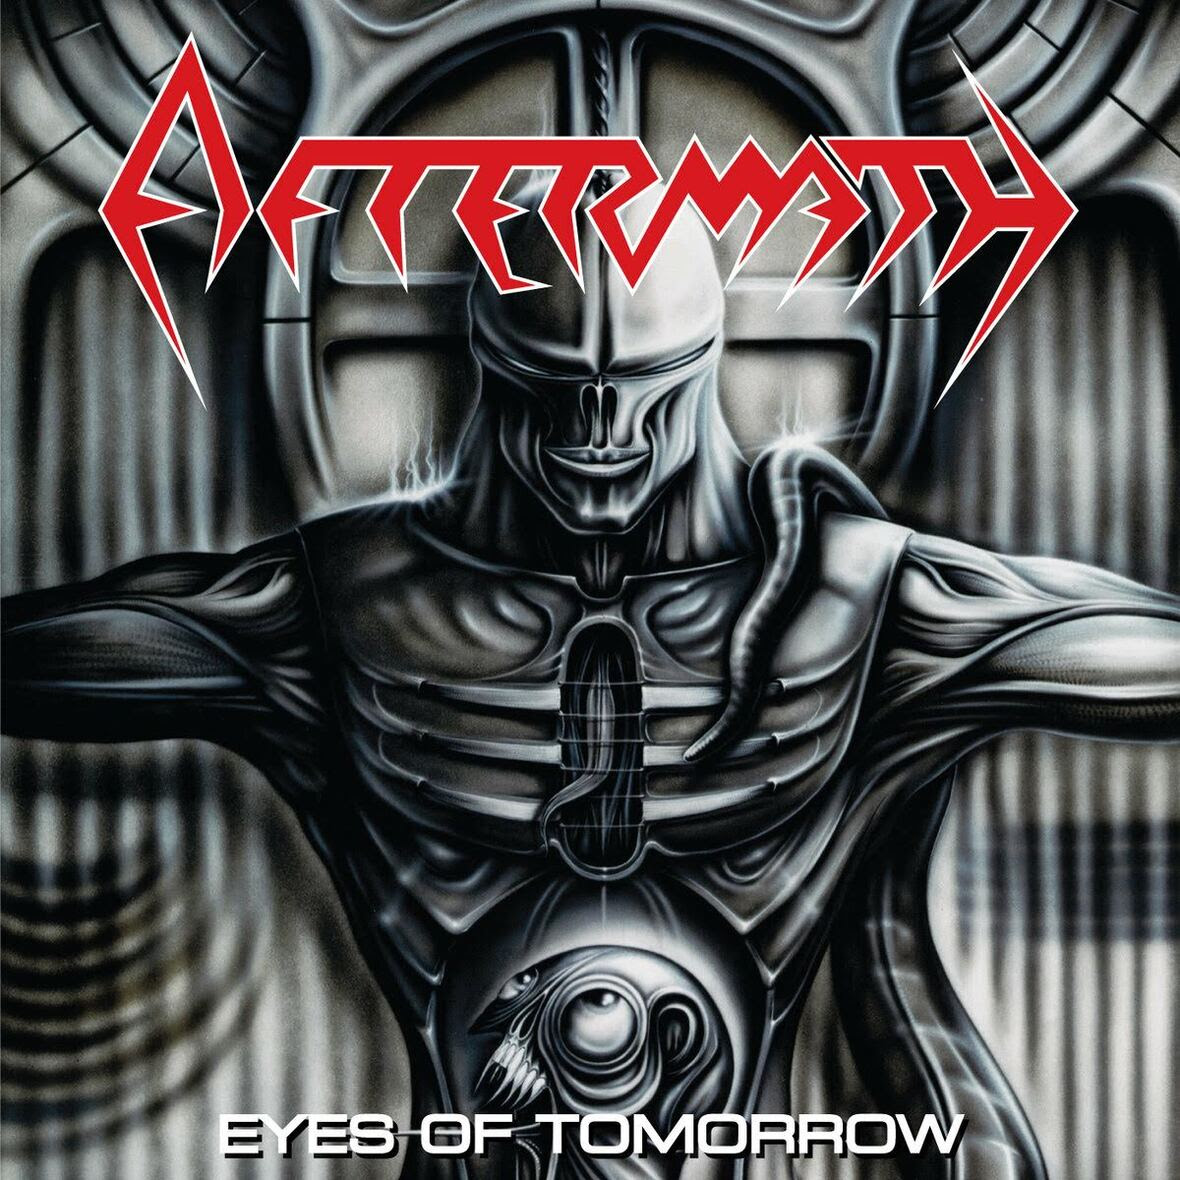 AFTERMATH Celebrate the 30th Anniversary of Their Album ‘Eyes of Tomorrow’!